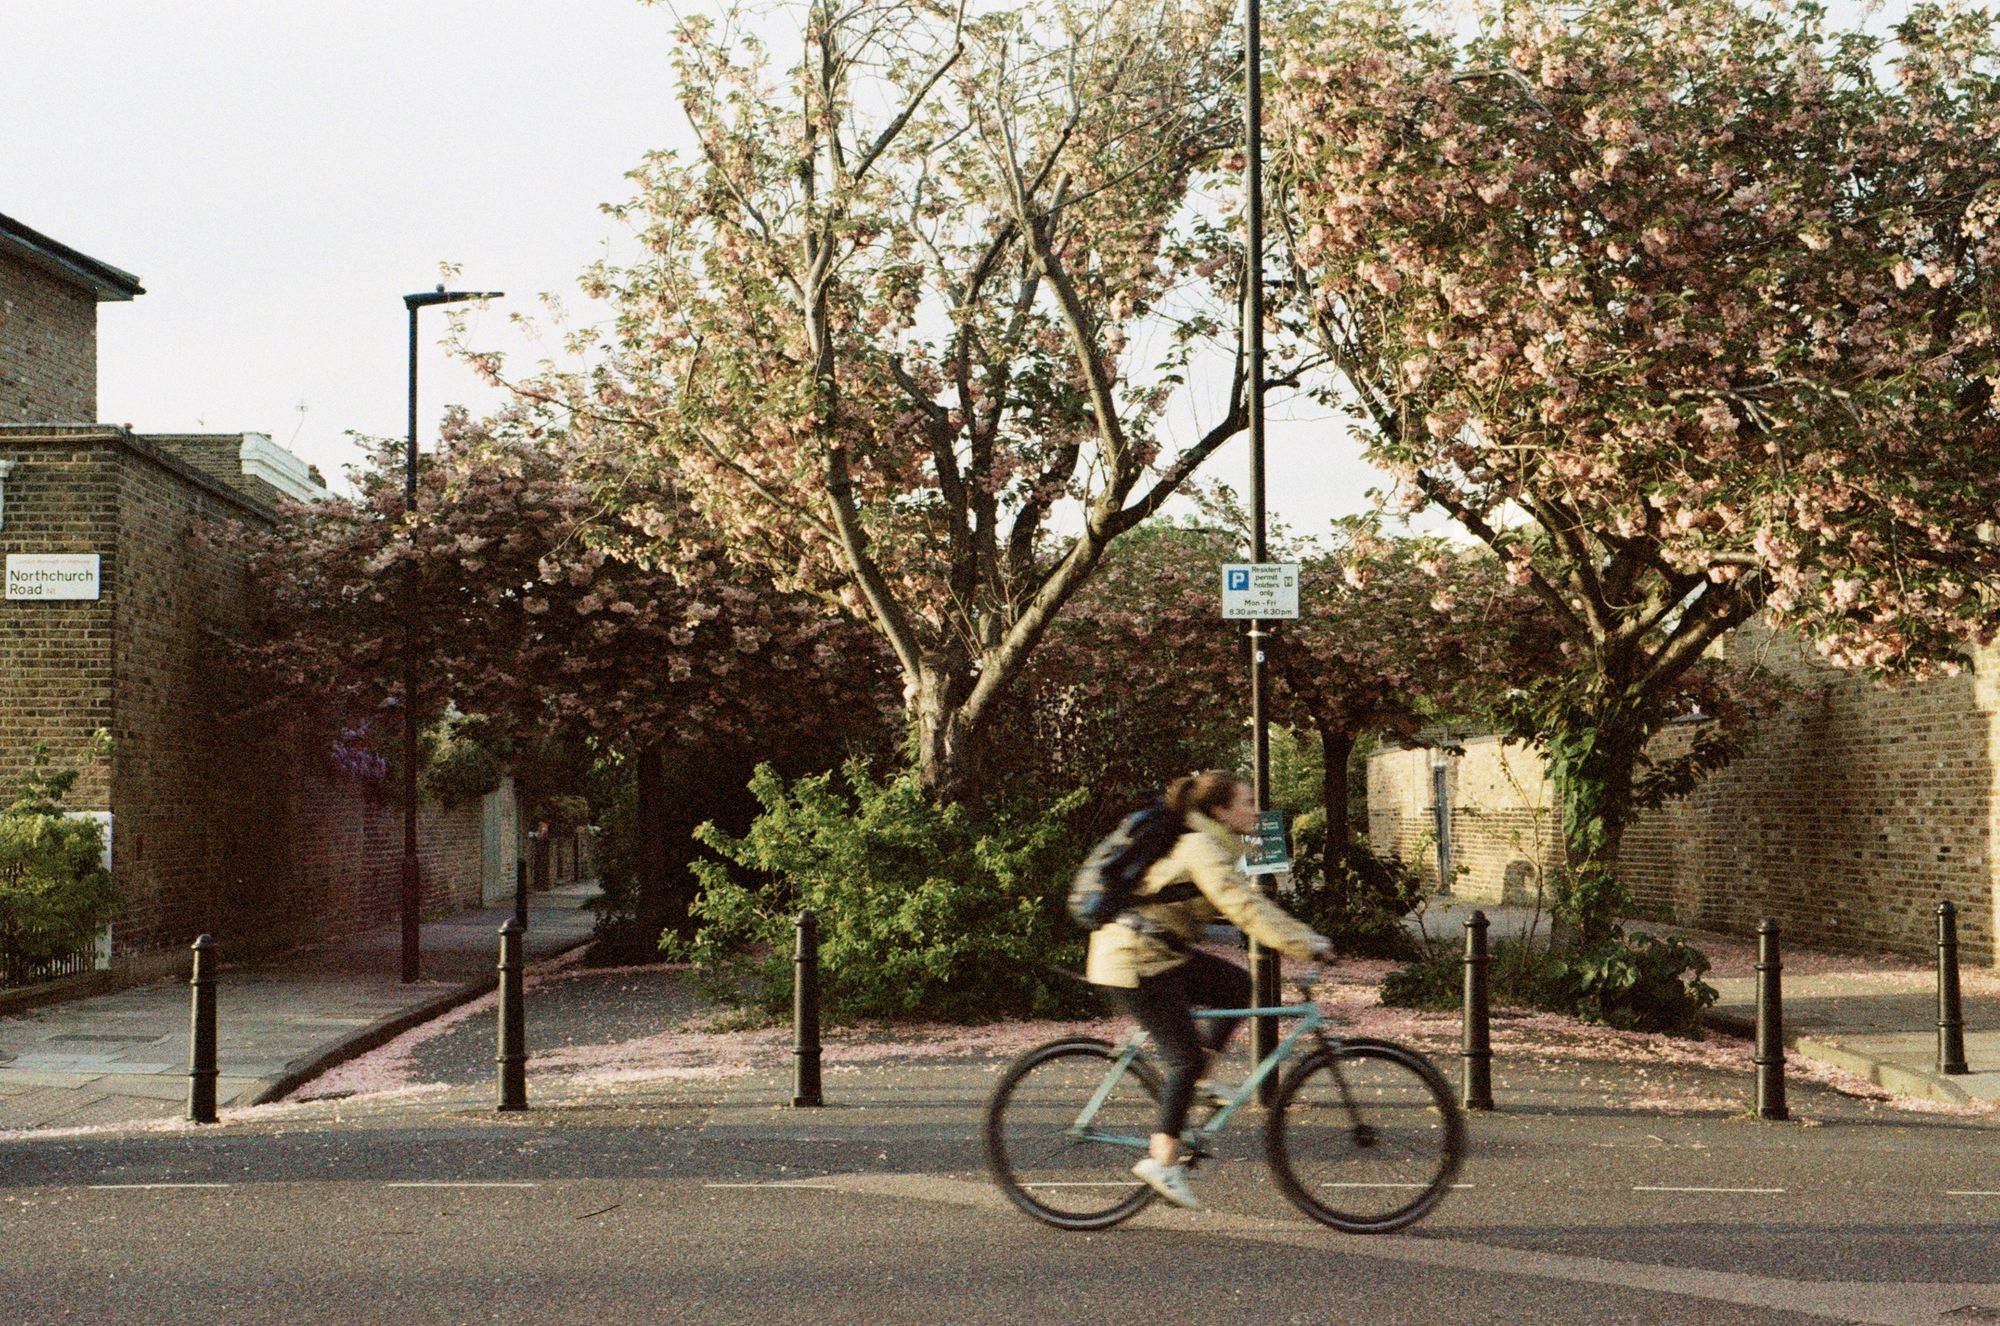 A woman on a blue bicycle cycles past a filtered pedestrianised area chock-full of trees that have their blossom going over on an evening with a warm brown cast.